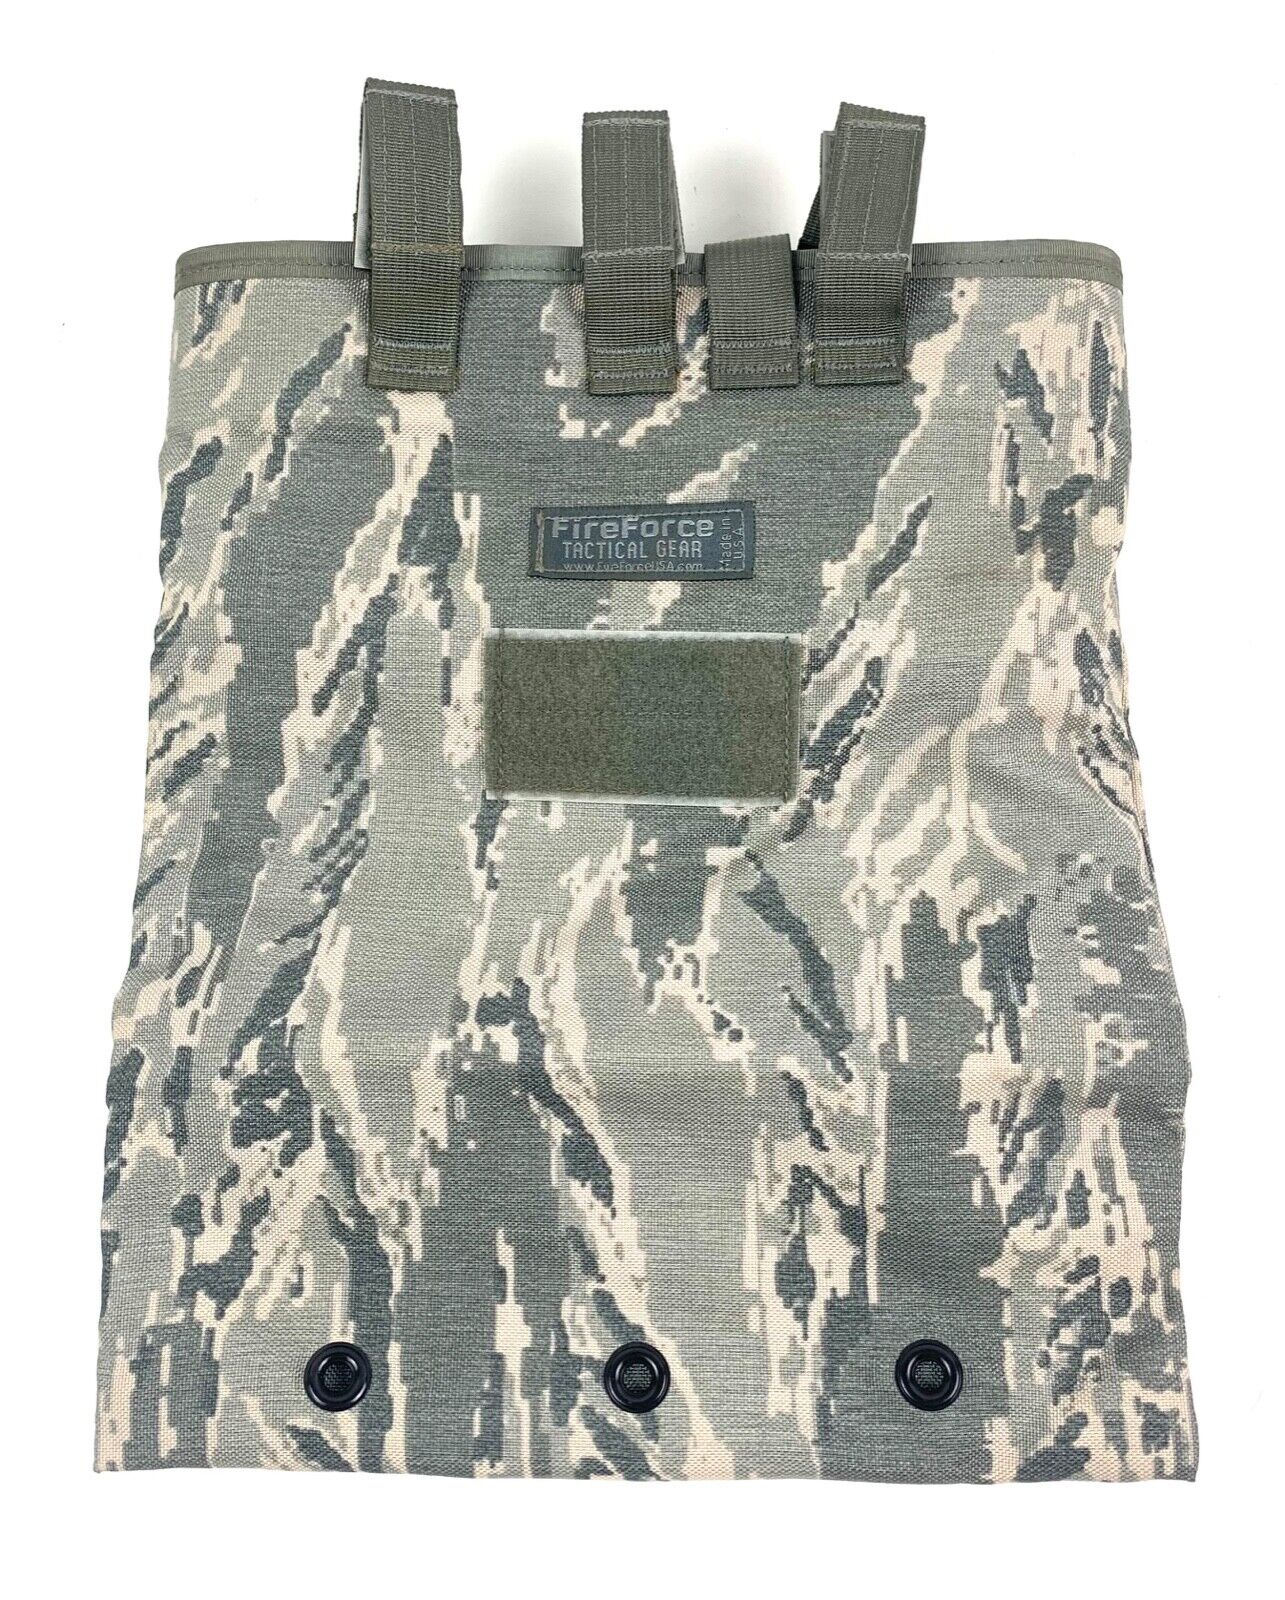 New Fire Force USAF Air Force ABU Camouflage Dump Pouch Bag MOLLE 